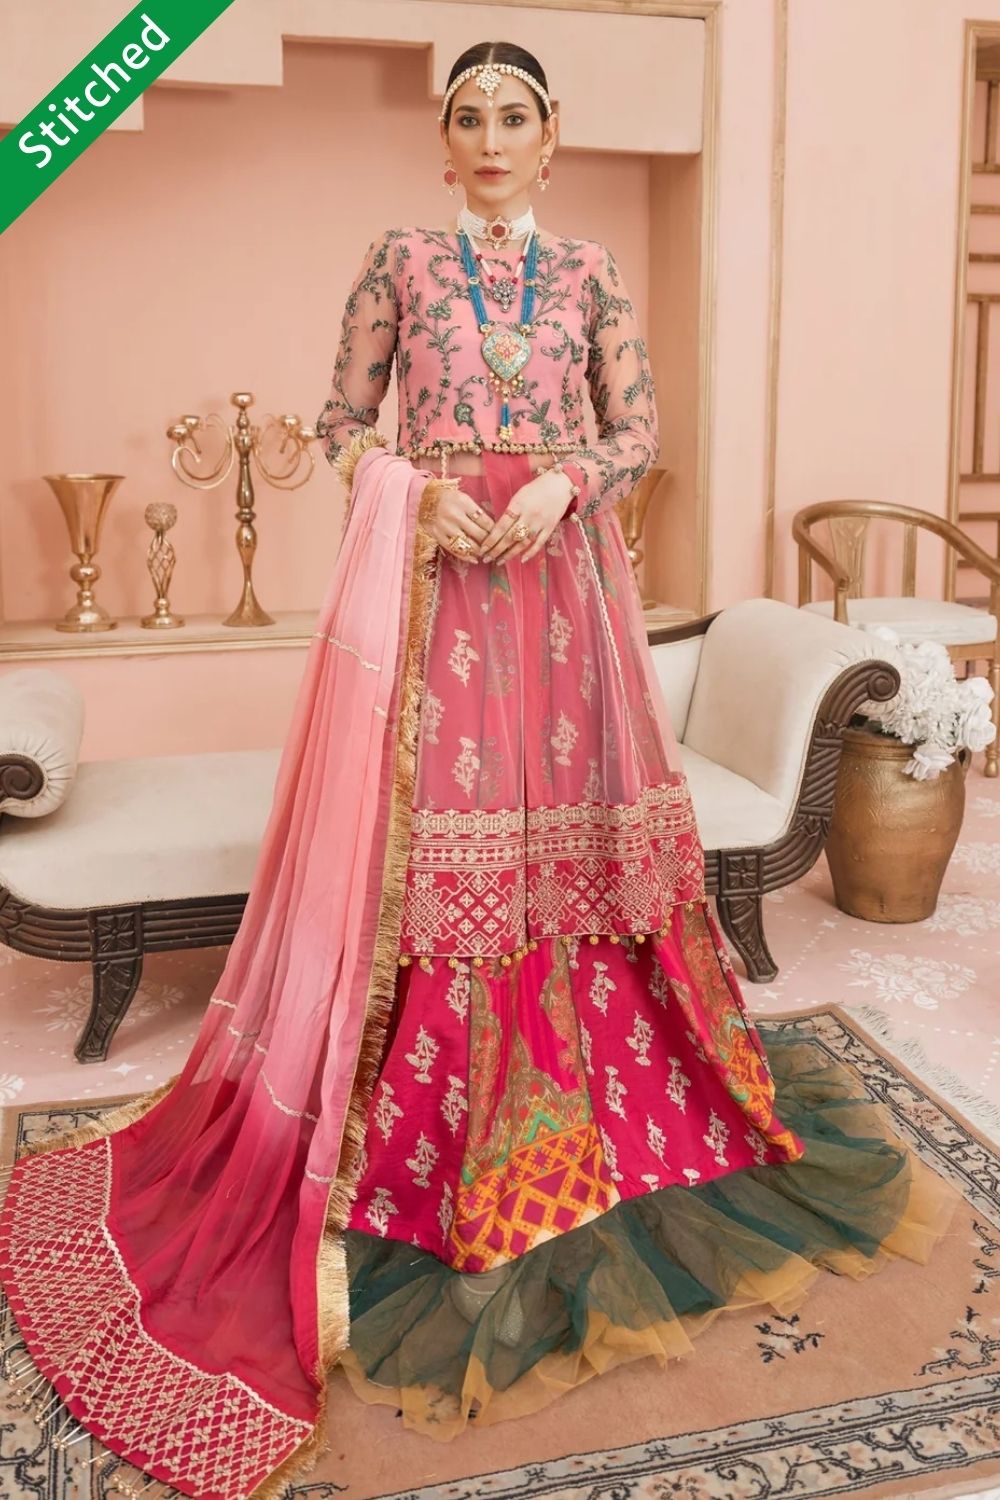 Shop Latest Indian Bridal Lehengas in Dubai for Women Online Today